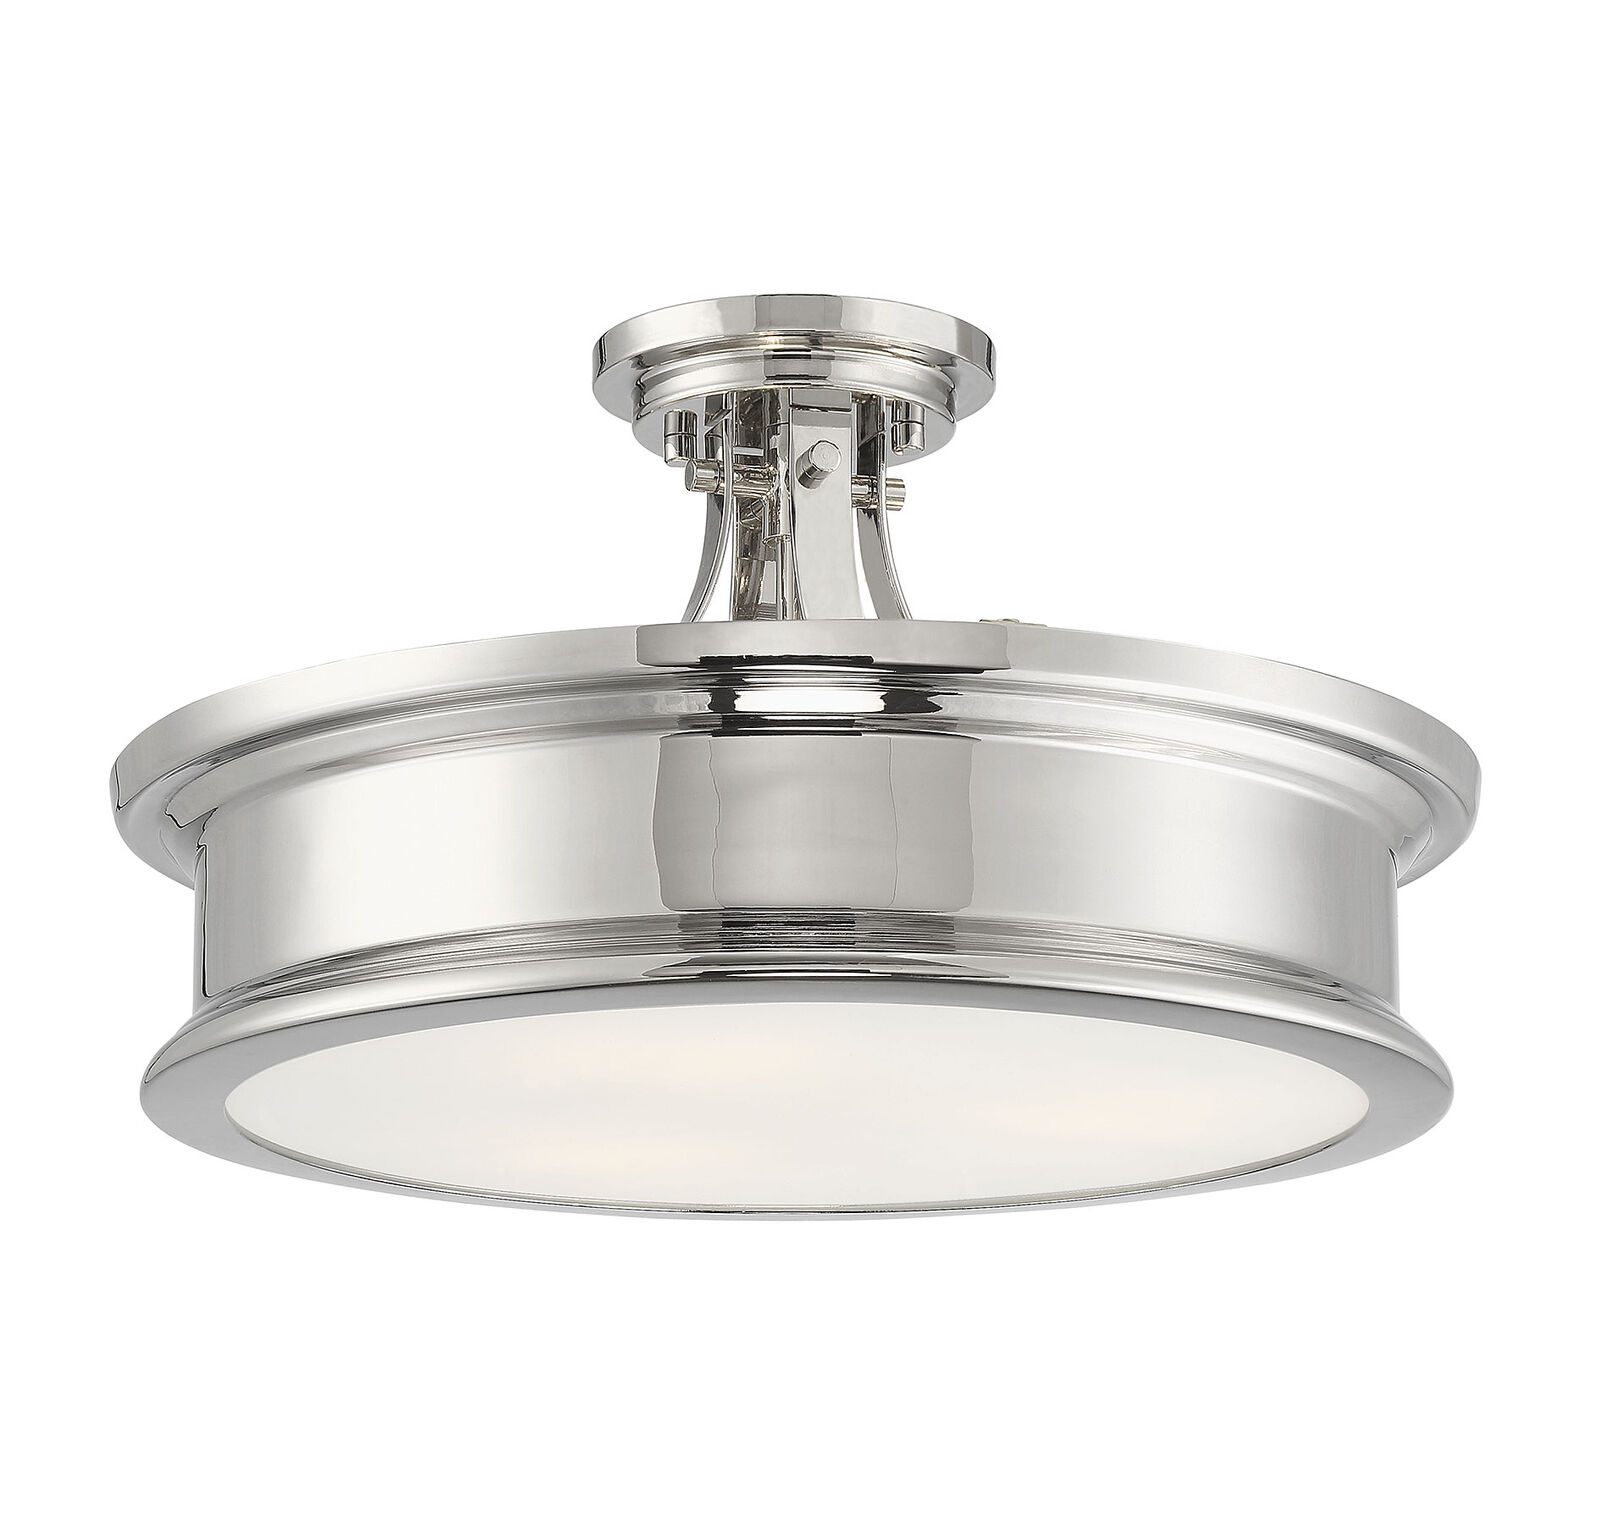 Watkins 3 Light Ceiling Light in Polished Nickel by Savoy House - 6-134-3-109